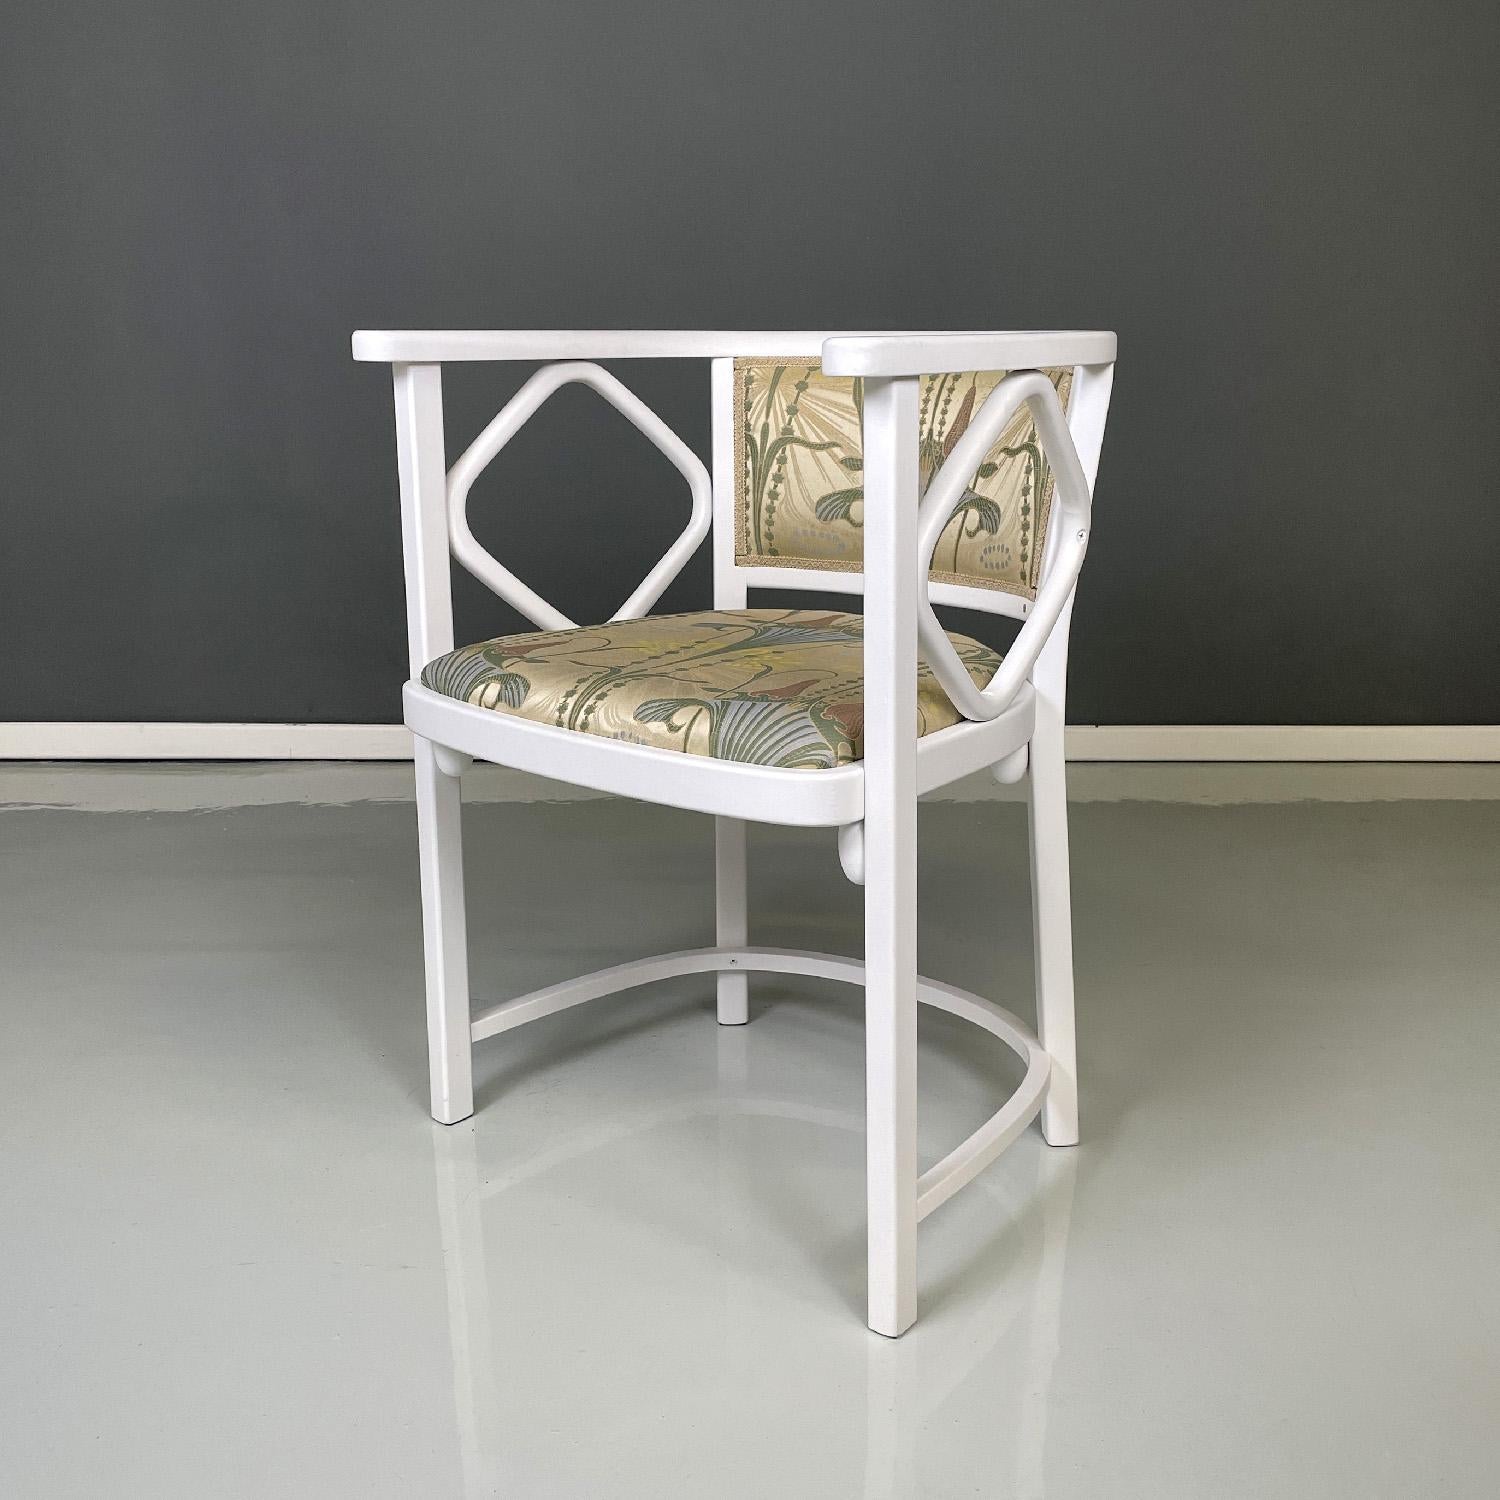 Austrian modern white wood fabric tub chairs Joseph Hoffmann for Thonet, 1970s
Set of four tub chairs. The structure is in white painted wood, has a rhomboid decoration on the sides of the seat. The seat and back are padded and covered in a William